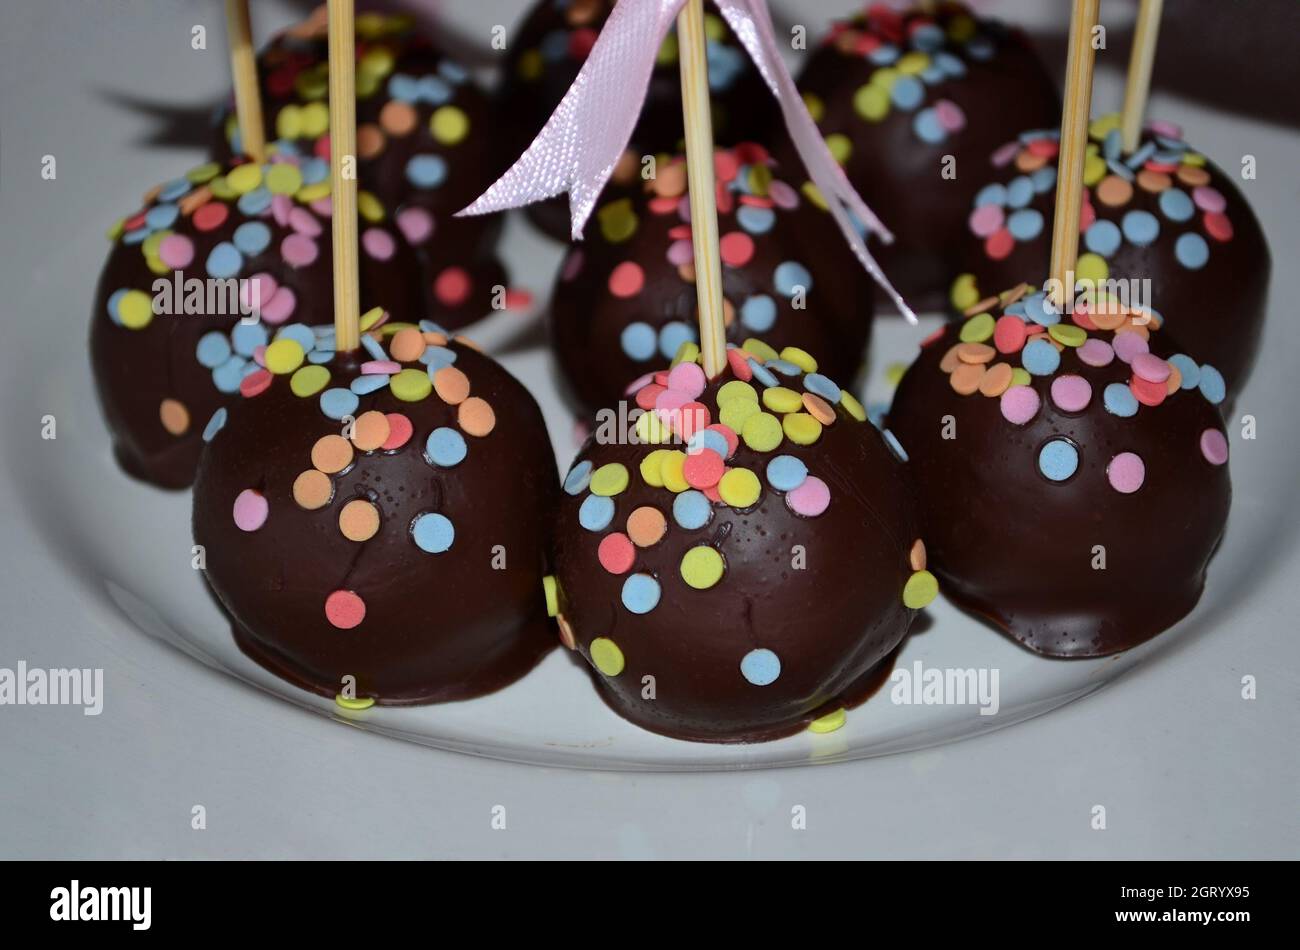 Cake Pop Easter Dessert High Resolution Stock Photography and Images - Alamy